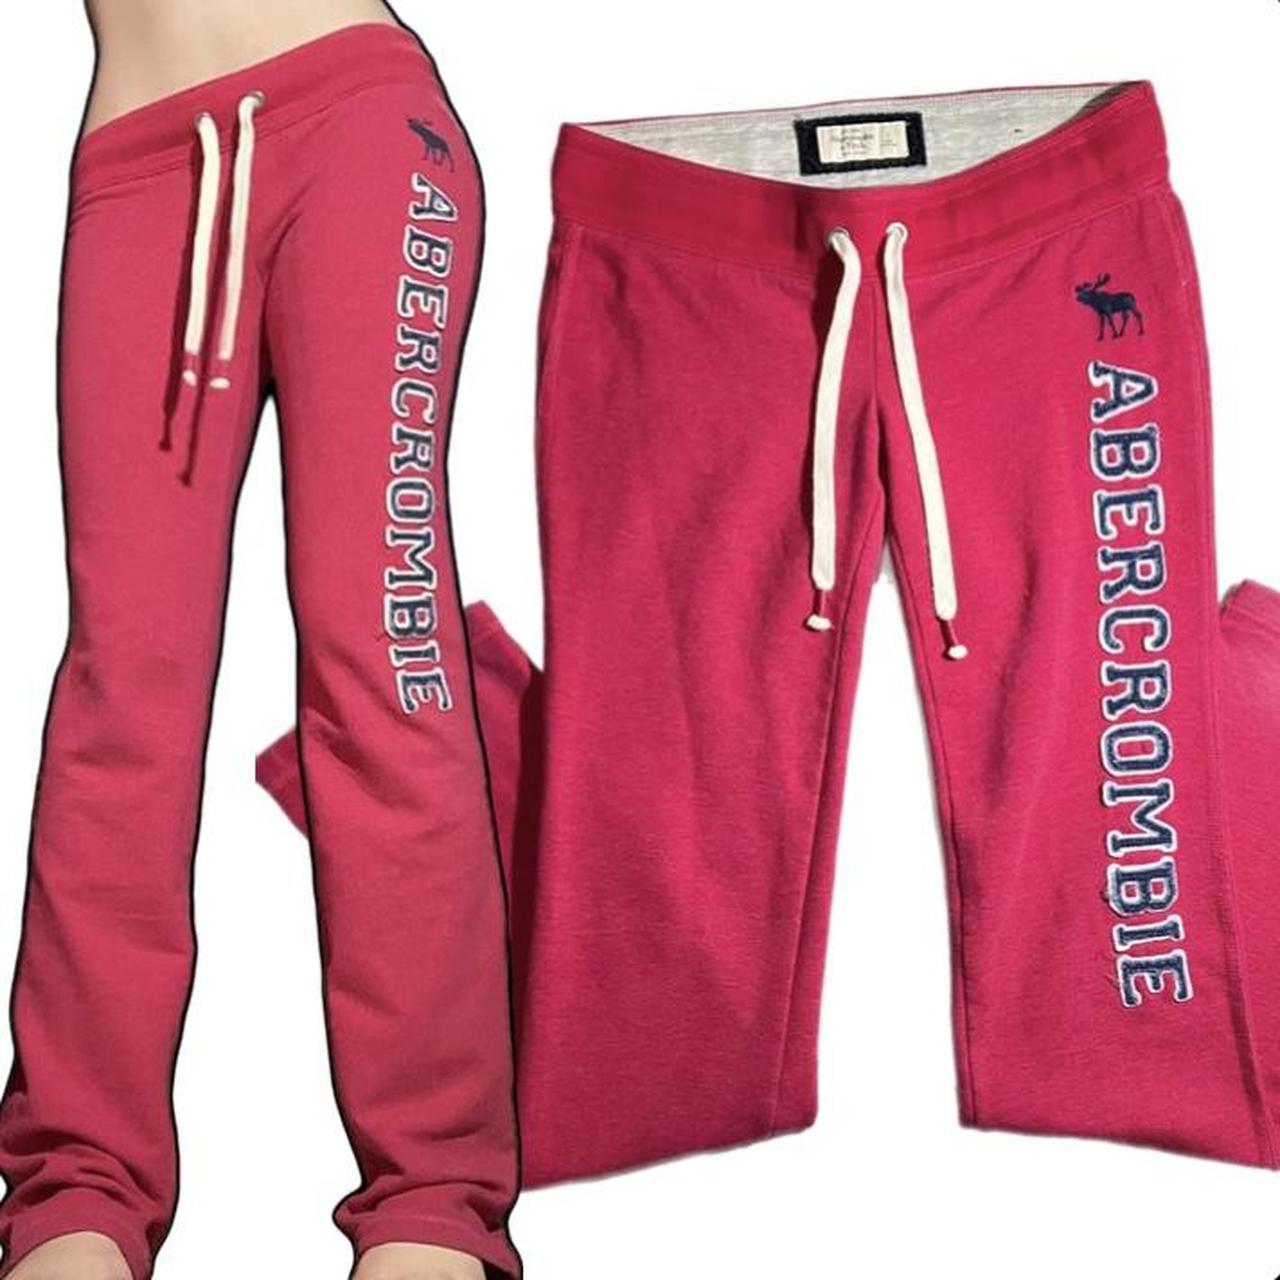 Hollister by Abercrombie Women's Pink Classic Banded Sweatpants